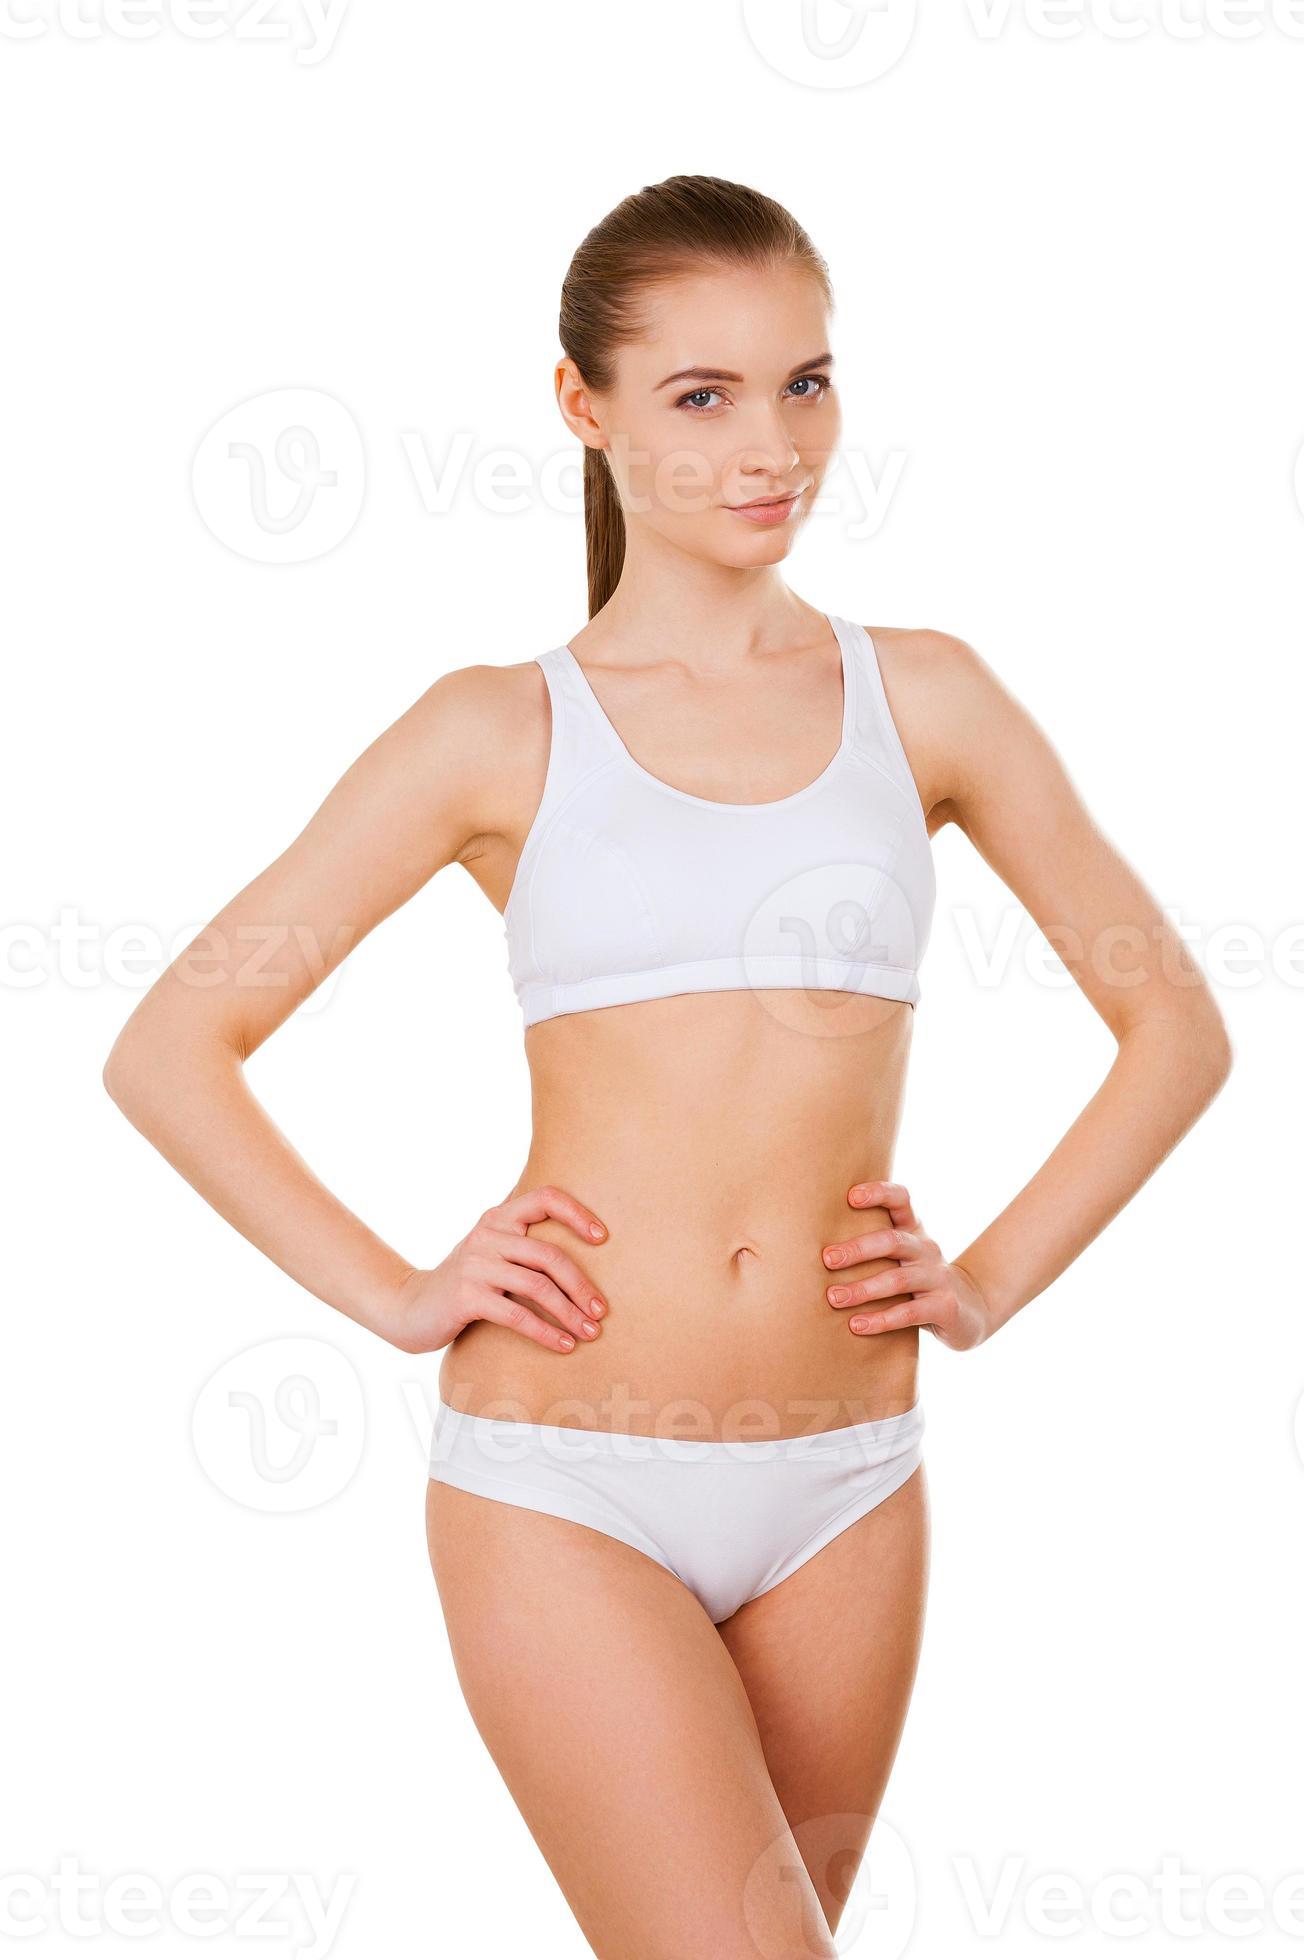 Premium Photo  Fit beauty. close-up of attractive young woman in white bra  and panties holding hands on hip while standing isolated on white